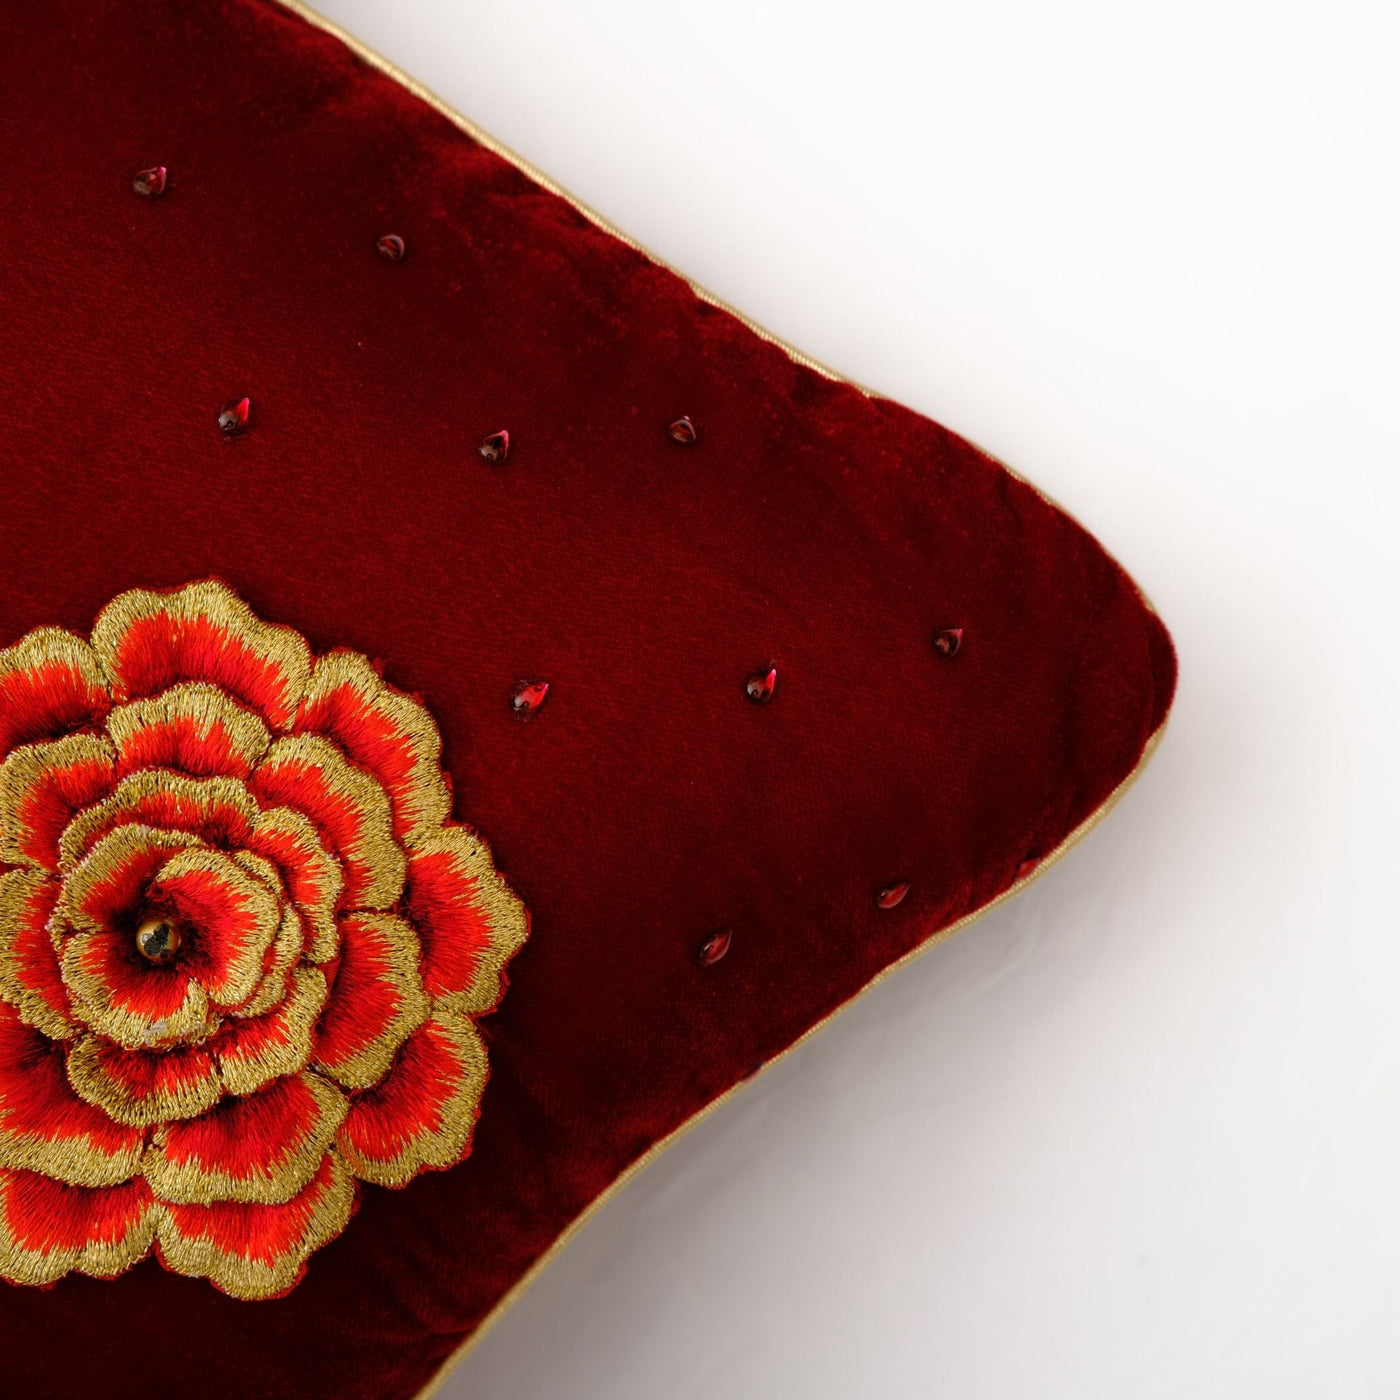 The Fabricrush  Pillowcases & Shams Red Embroidery Flower Cushion Cover